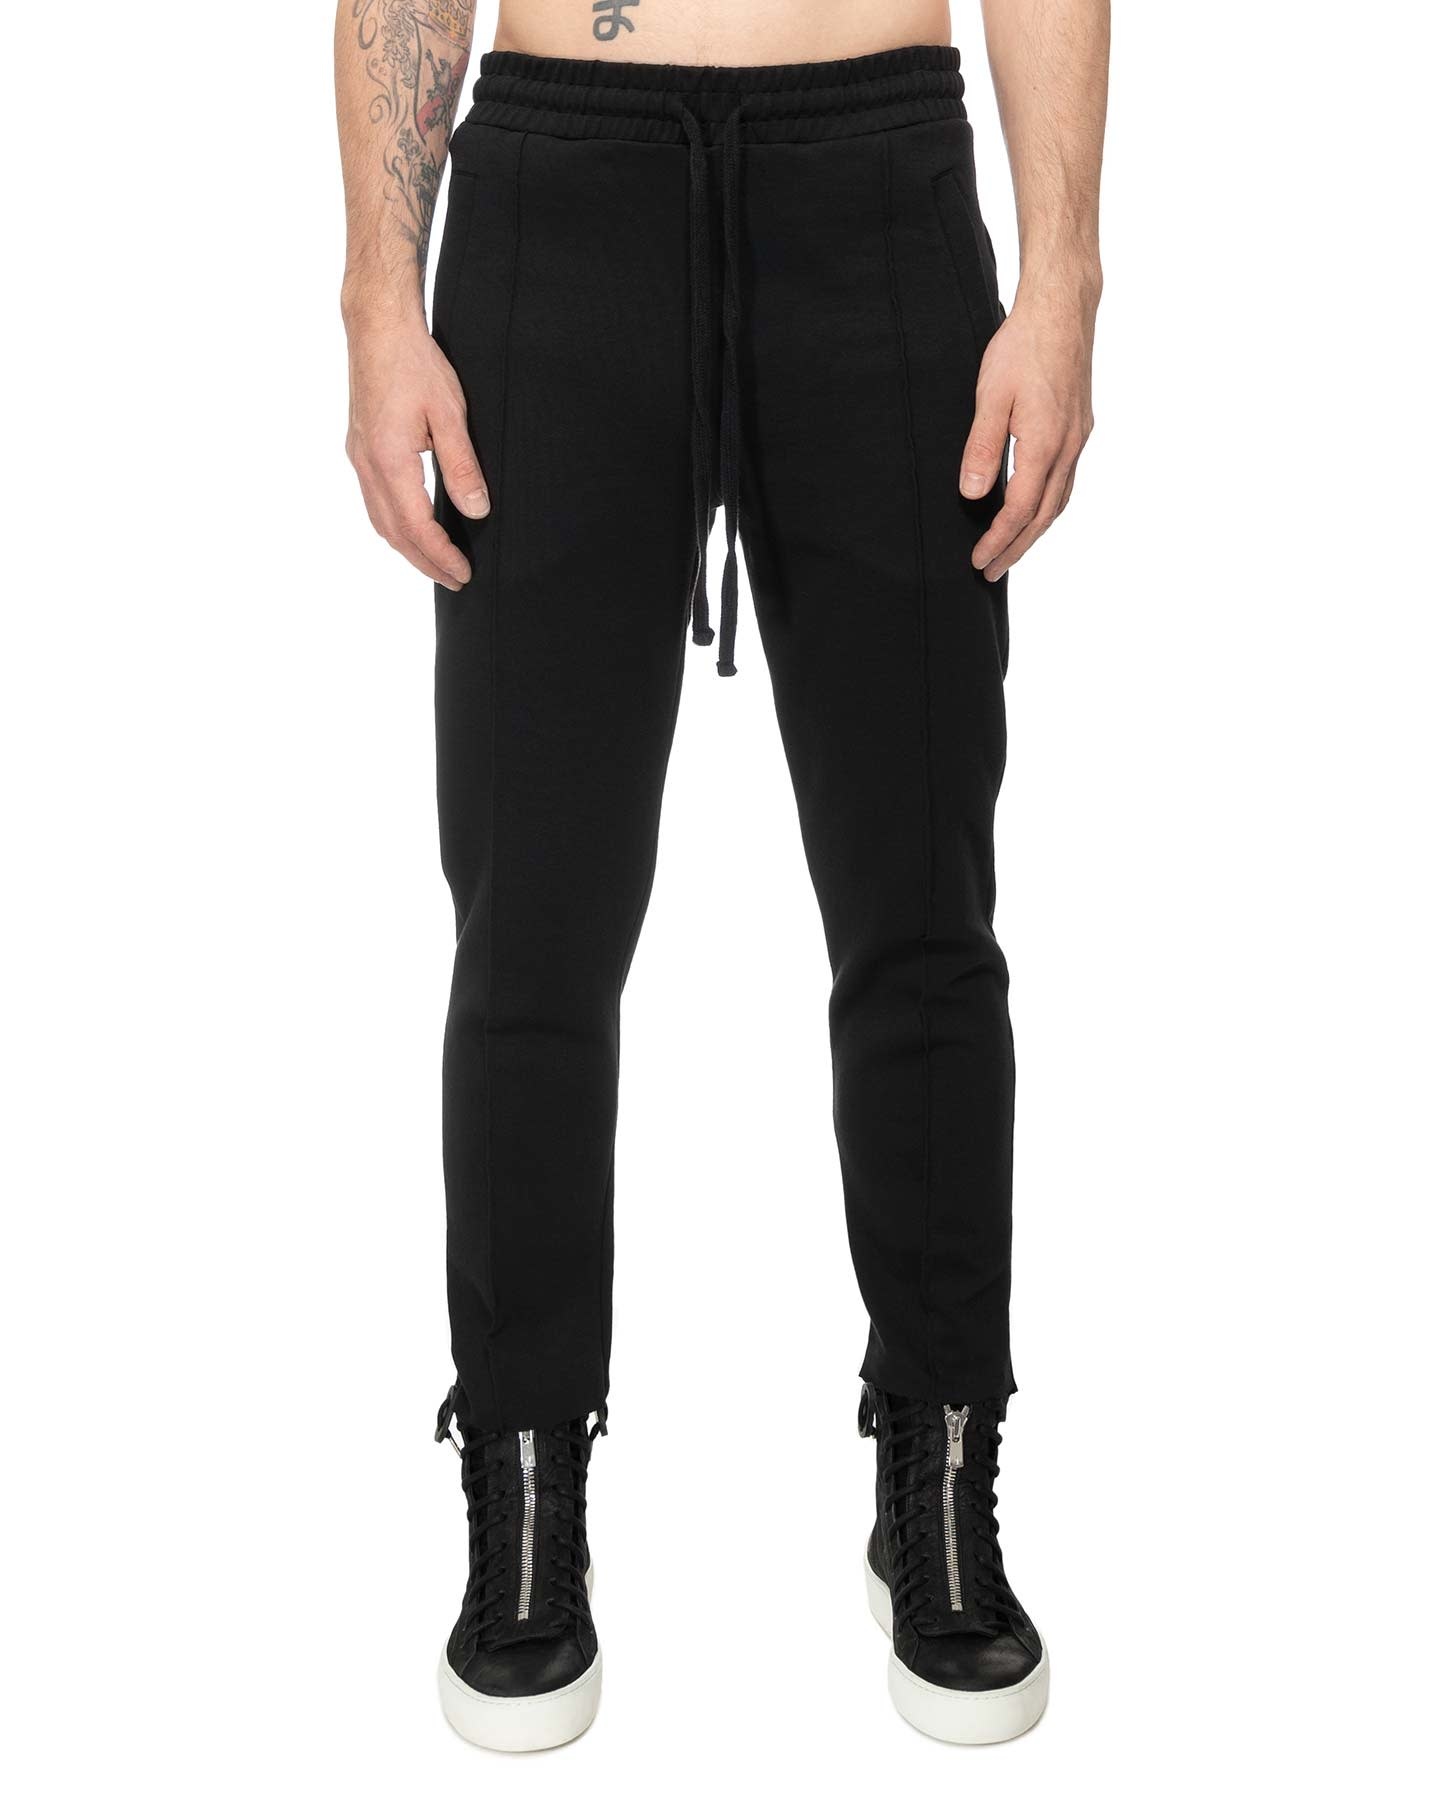 SWEAT TROUSER WITH PLEAT - BLACK